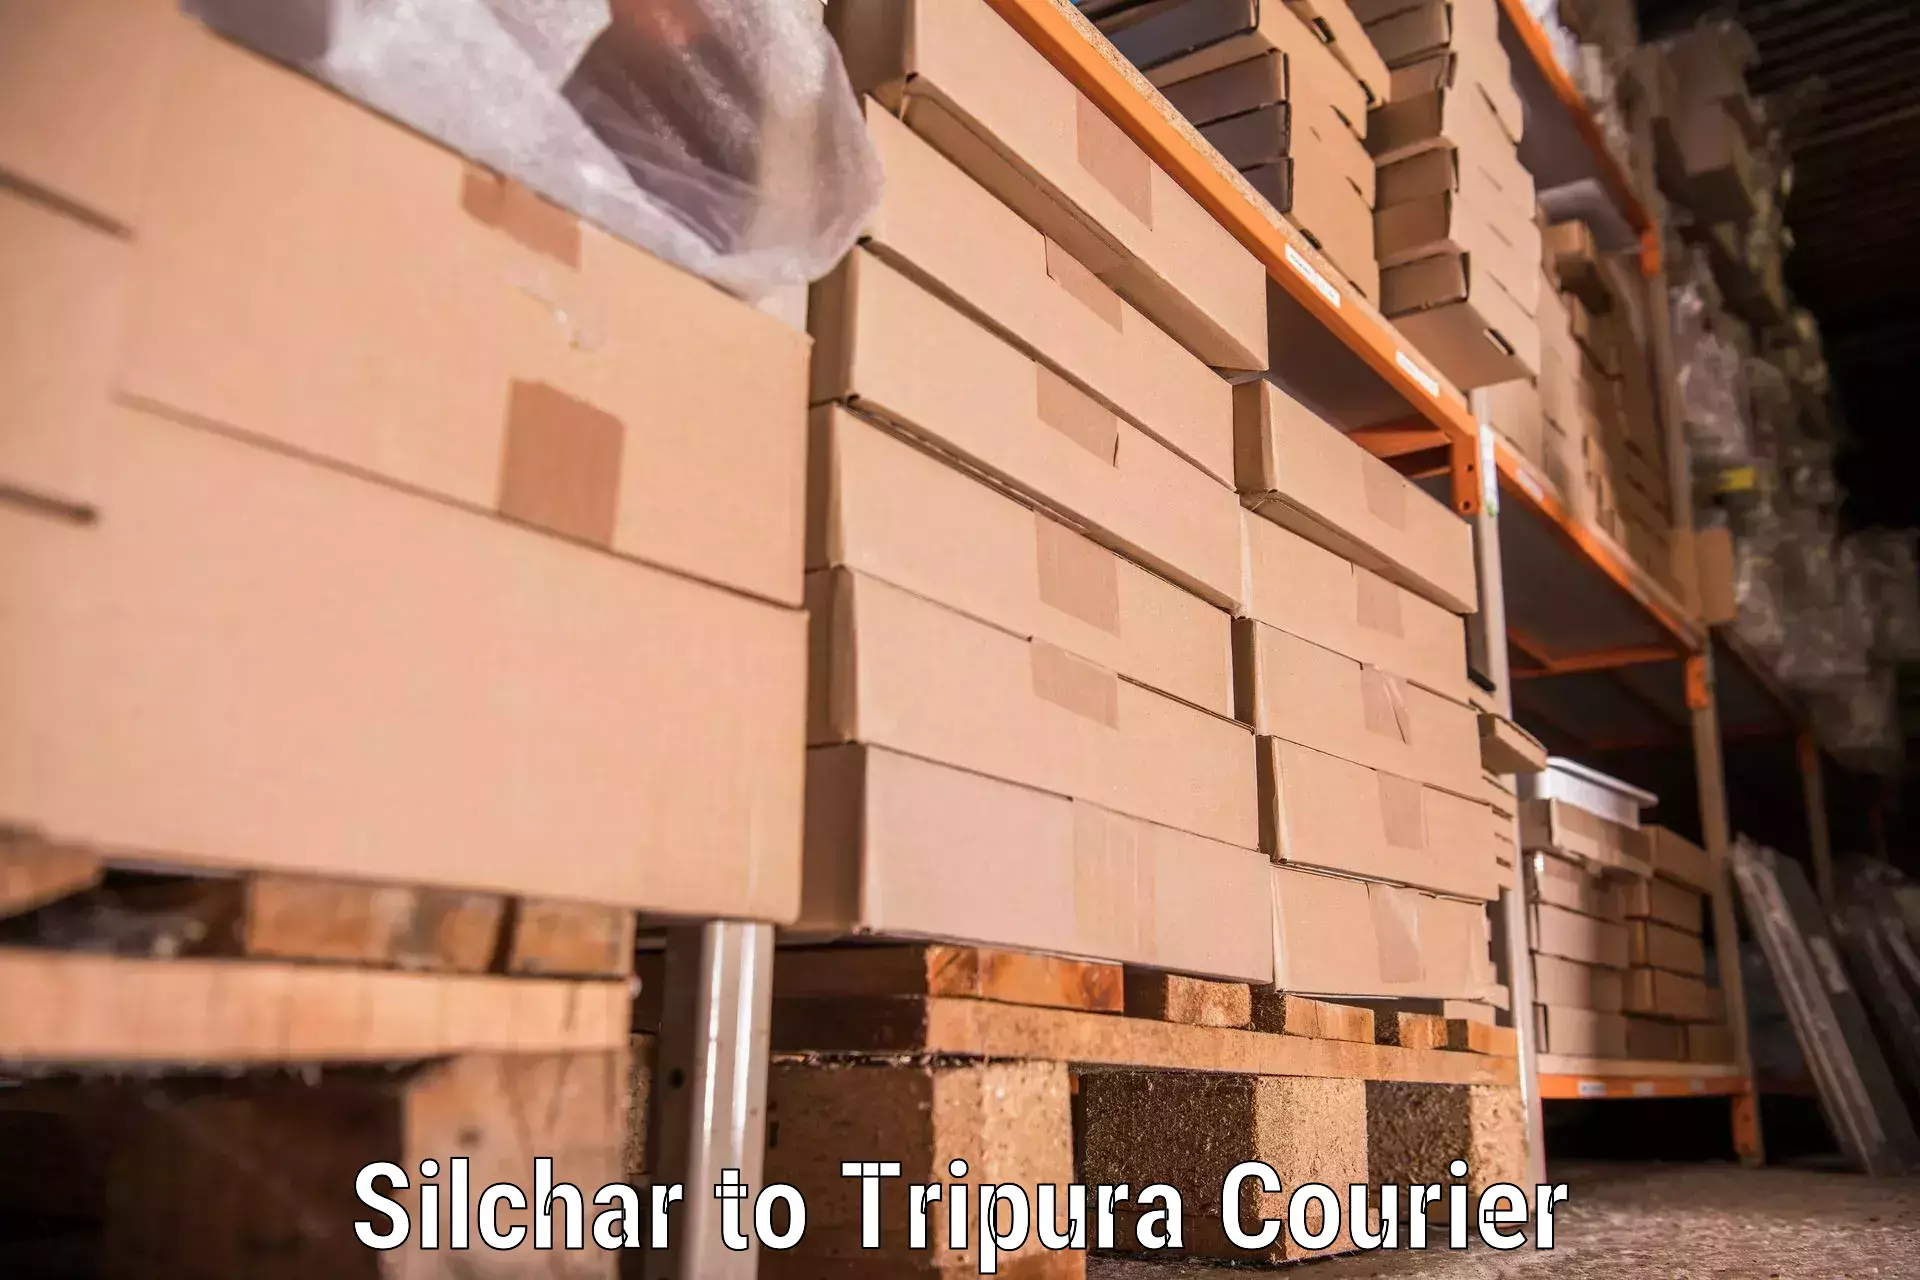 Customized moving experience Silchar to Udaipur Tripura